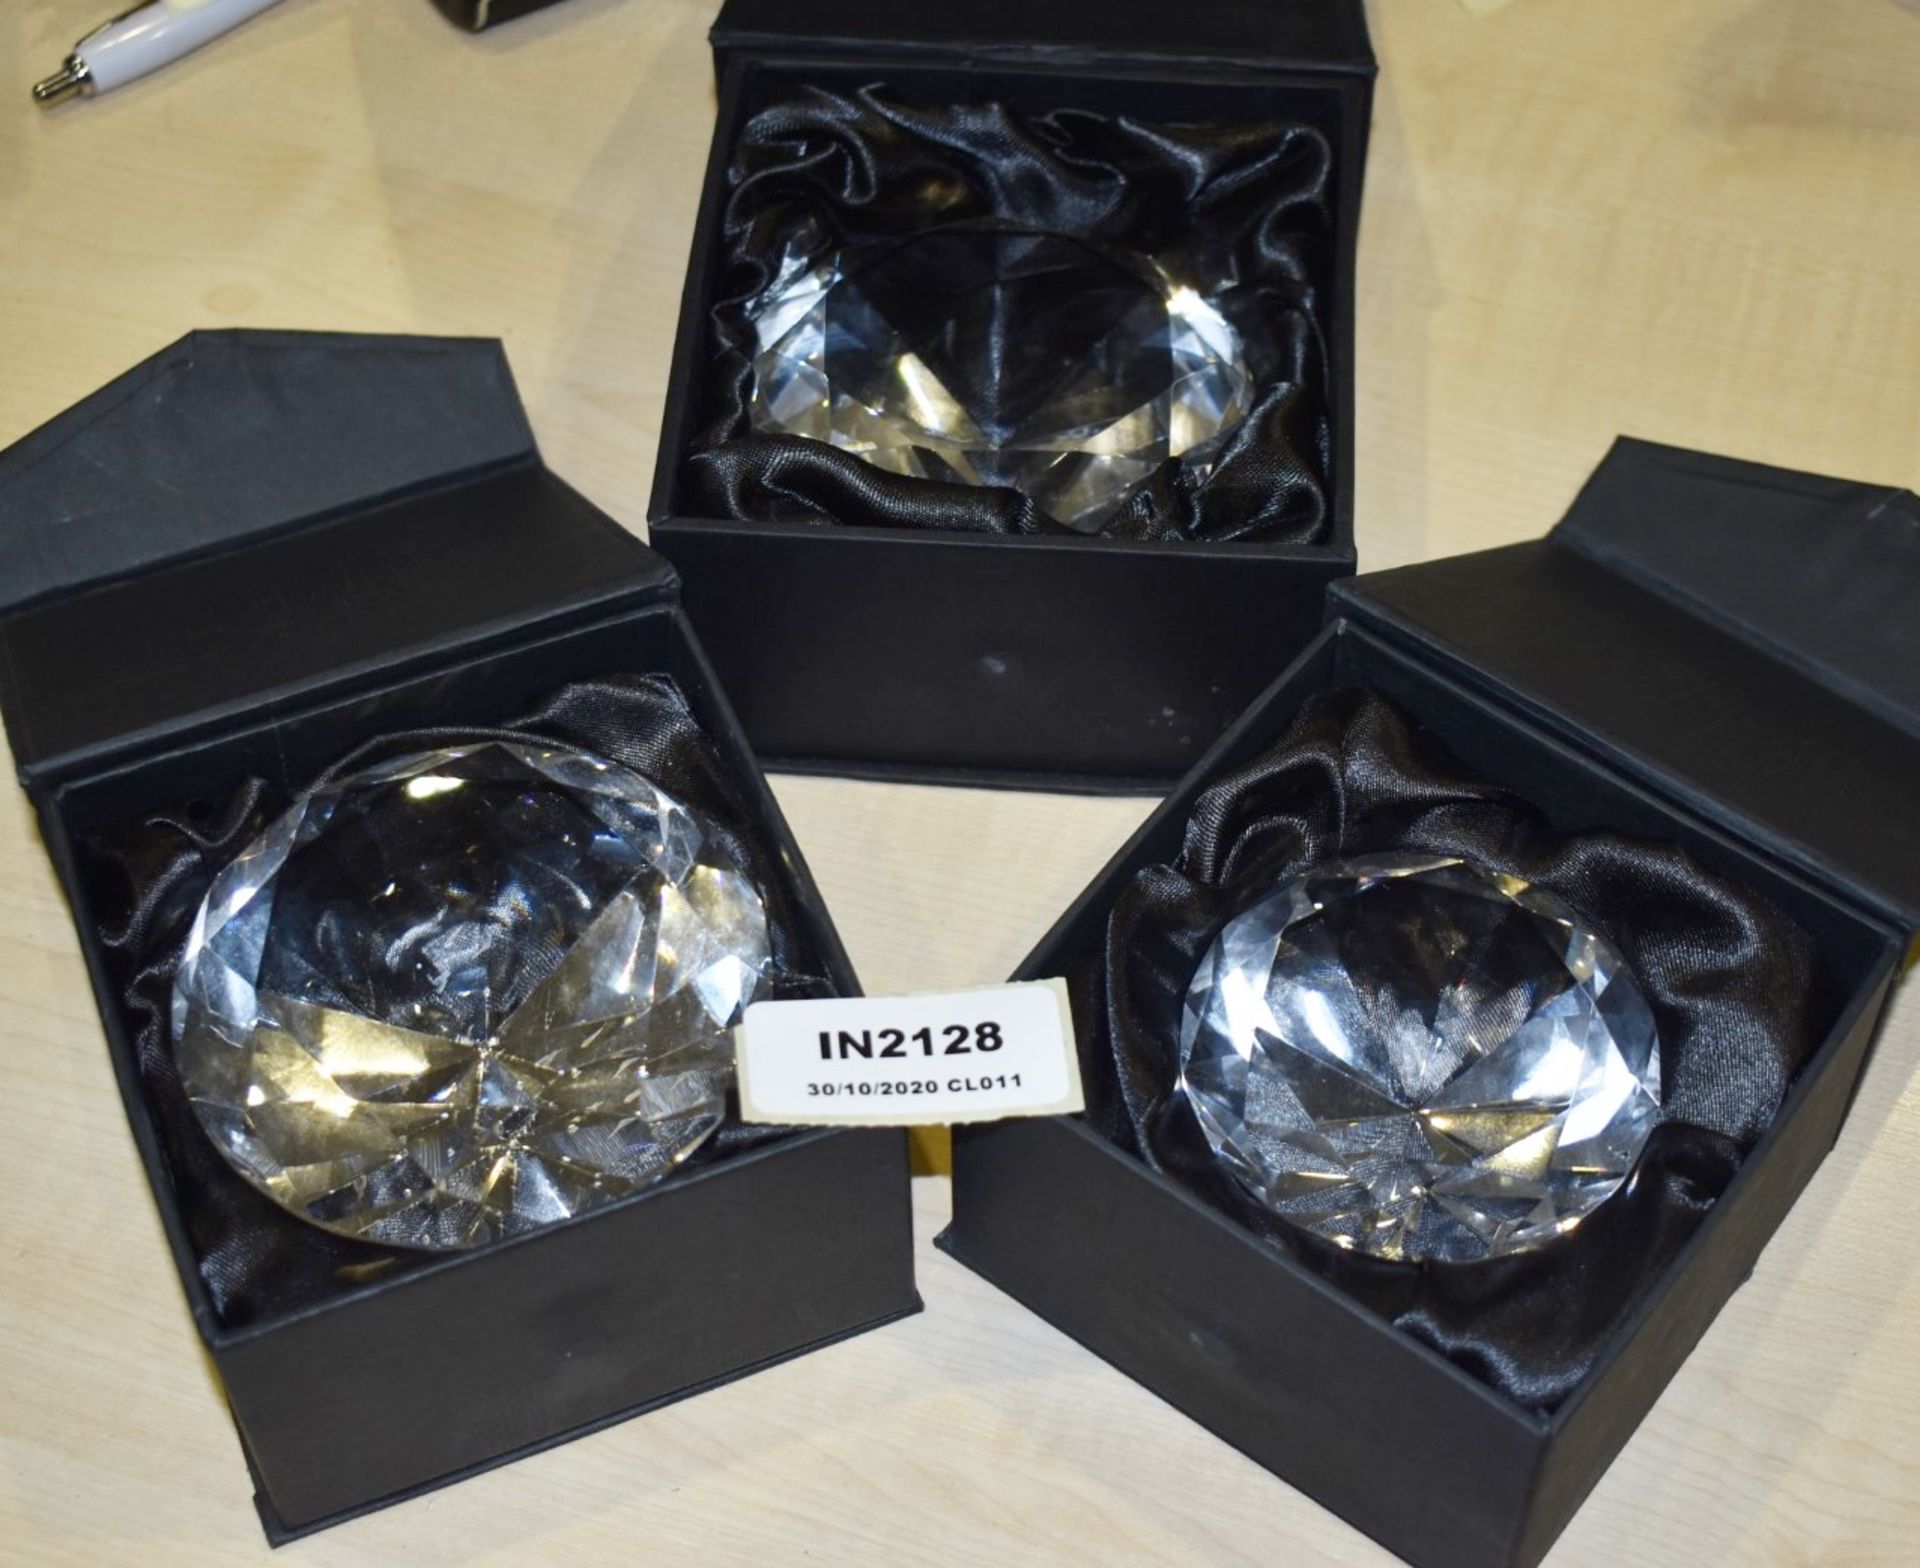 3 x Ice London Faux Diamond Paperweights - New and Boxed - Ref: In2128 wh1 pal1 - CL011 -